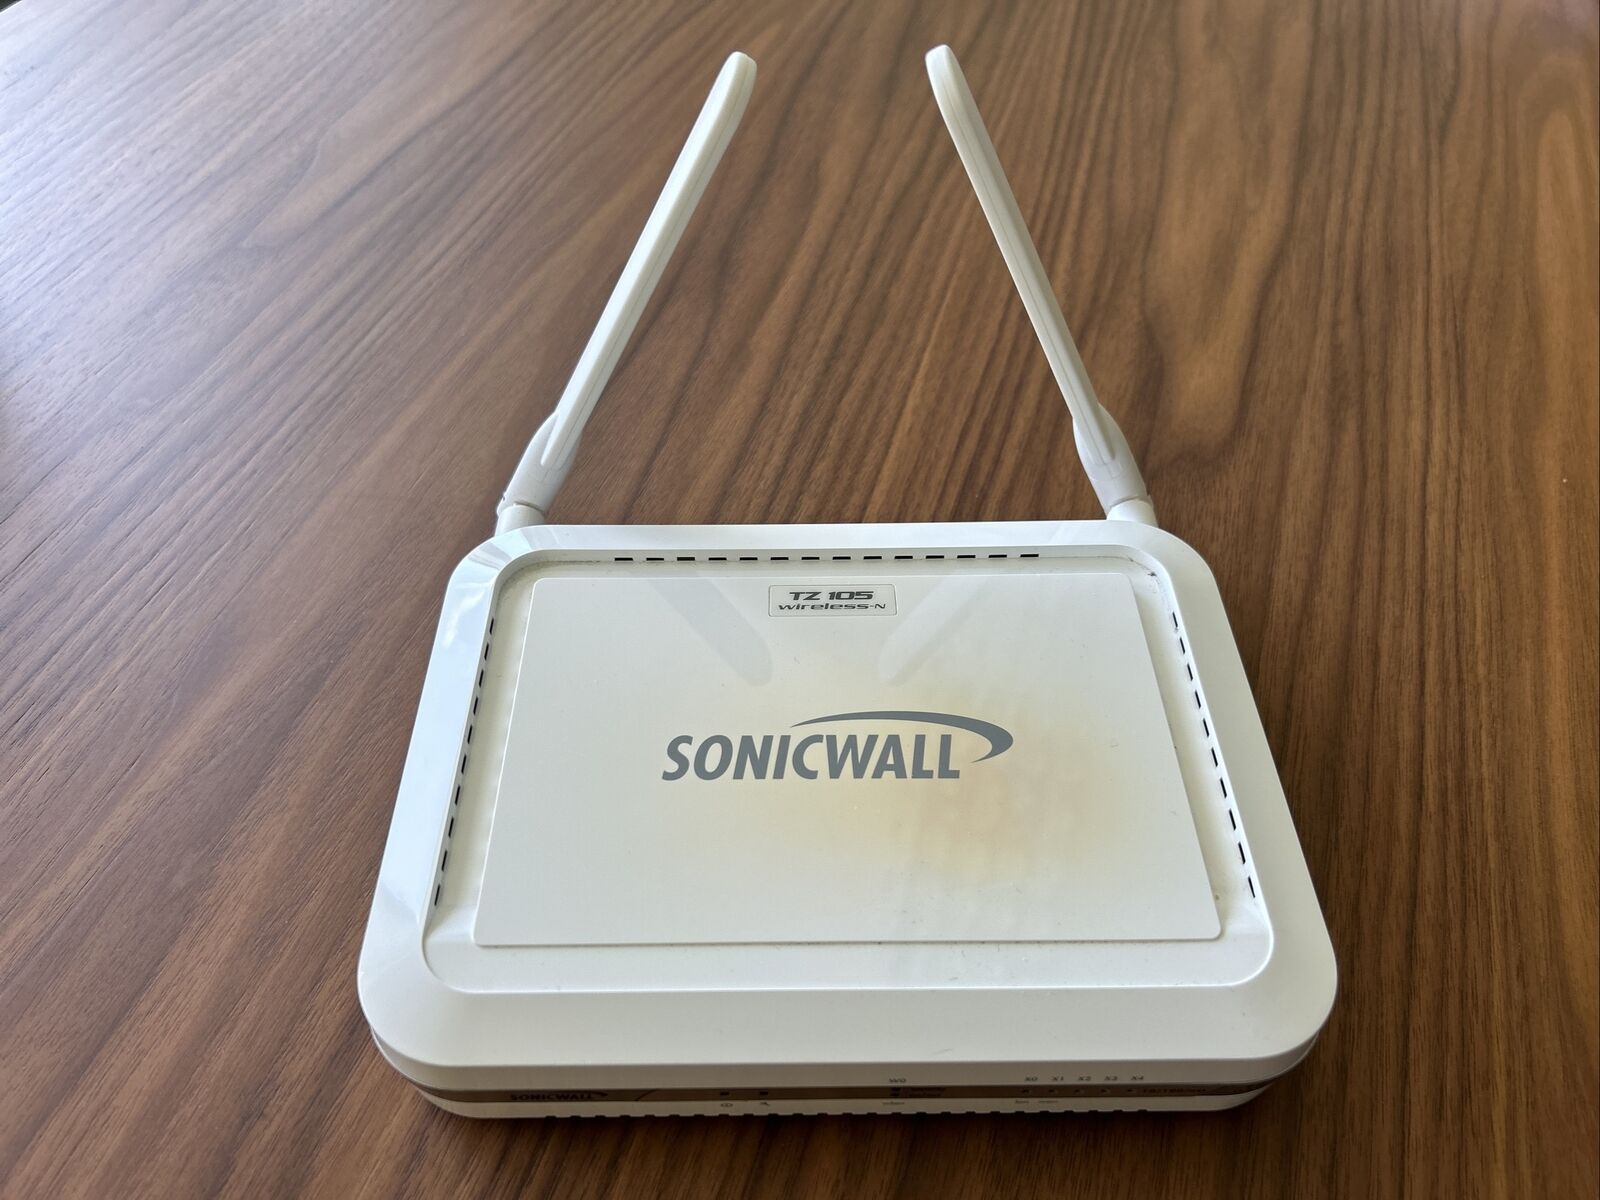 SonicWALL TZ105W Network Security Appliance USED